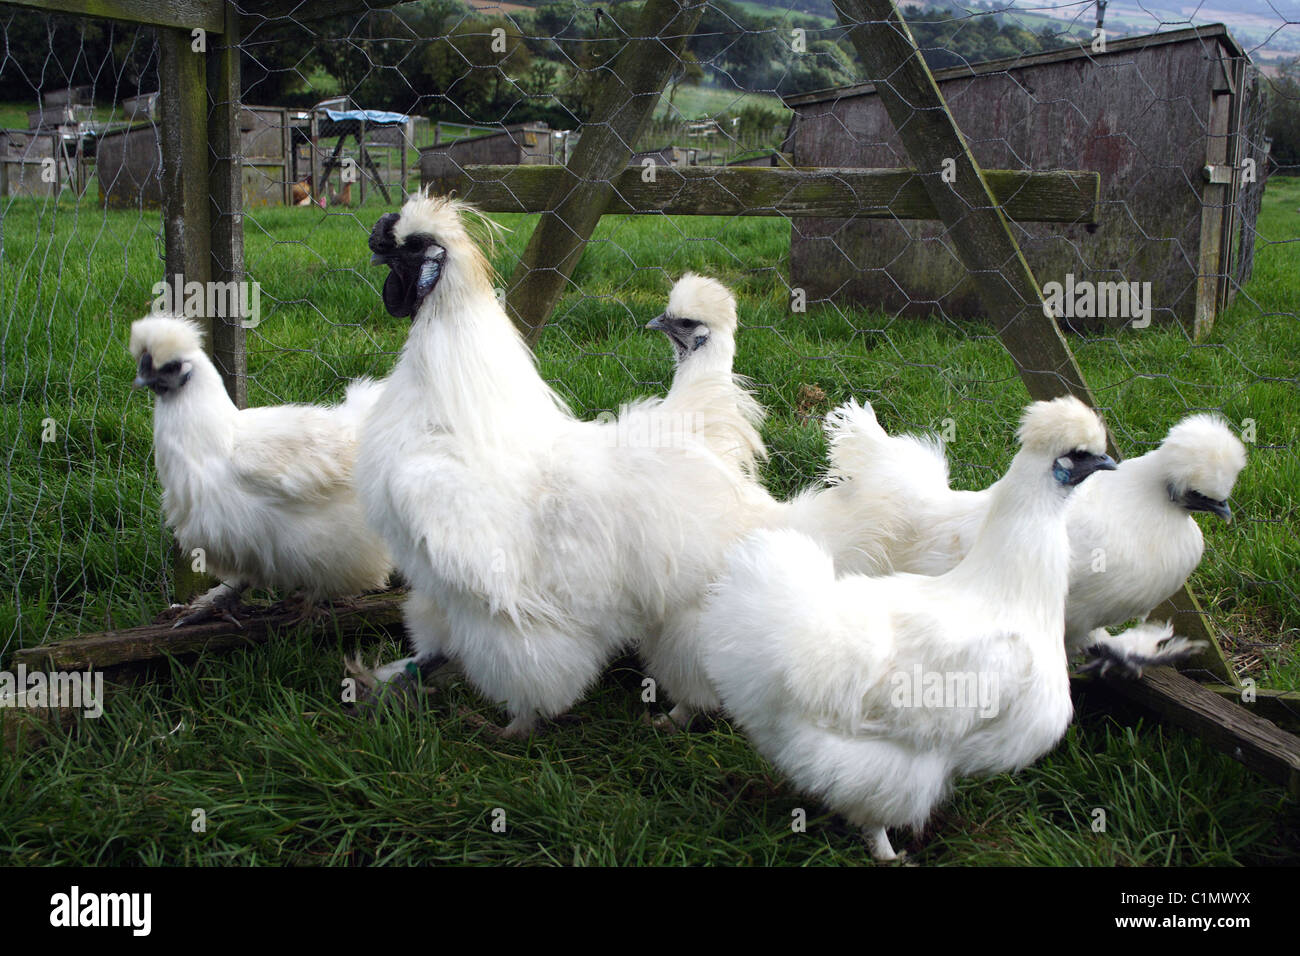 White Silkie chickens in a pen Stock Photo